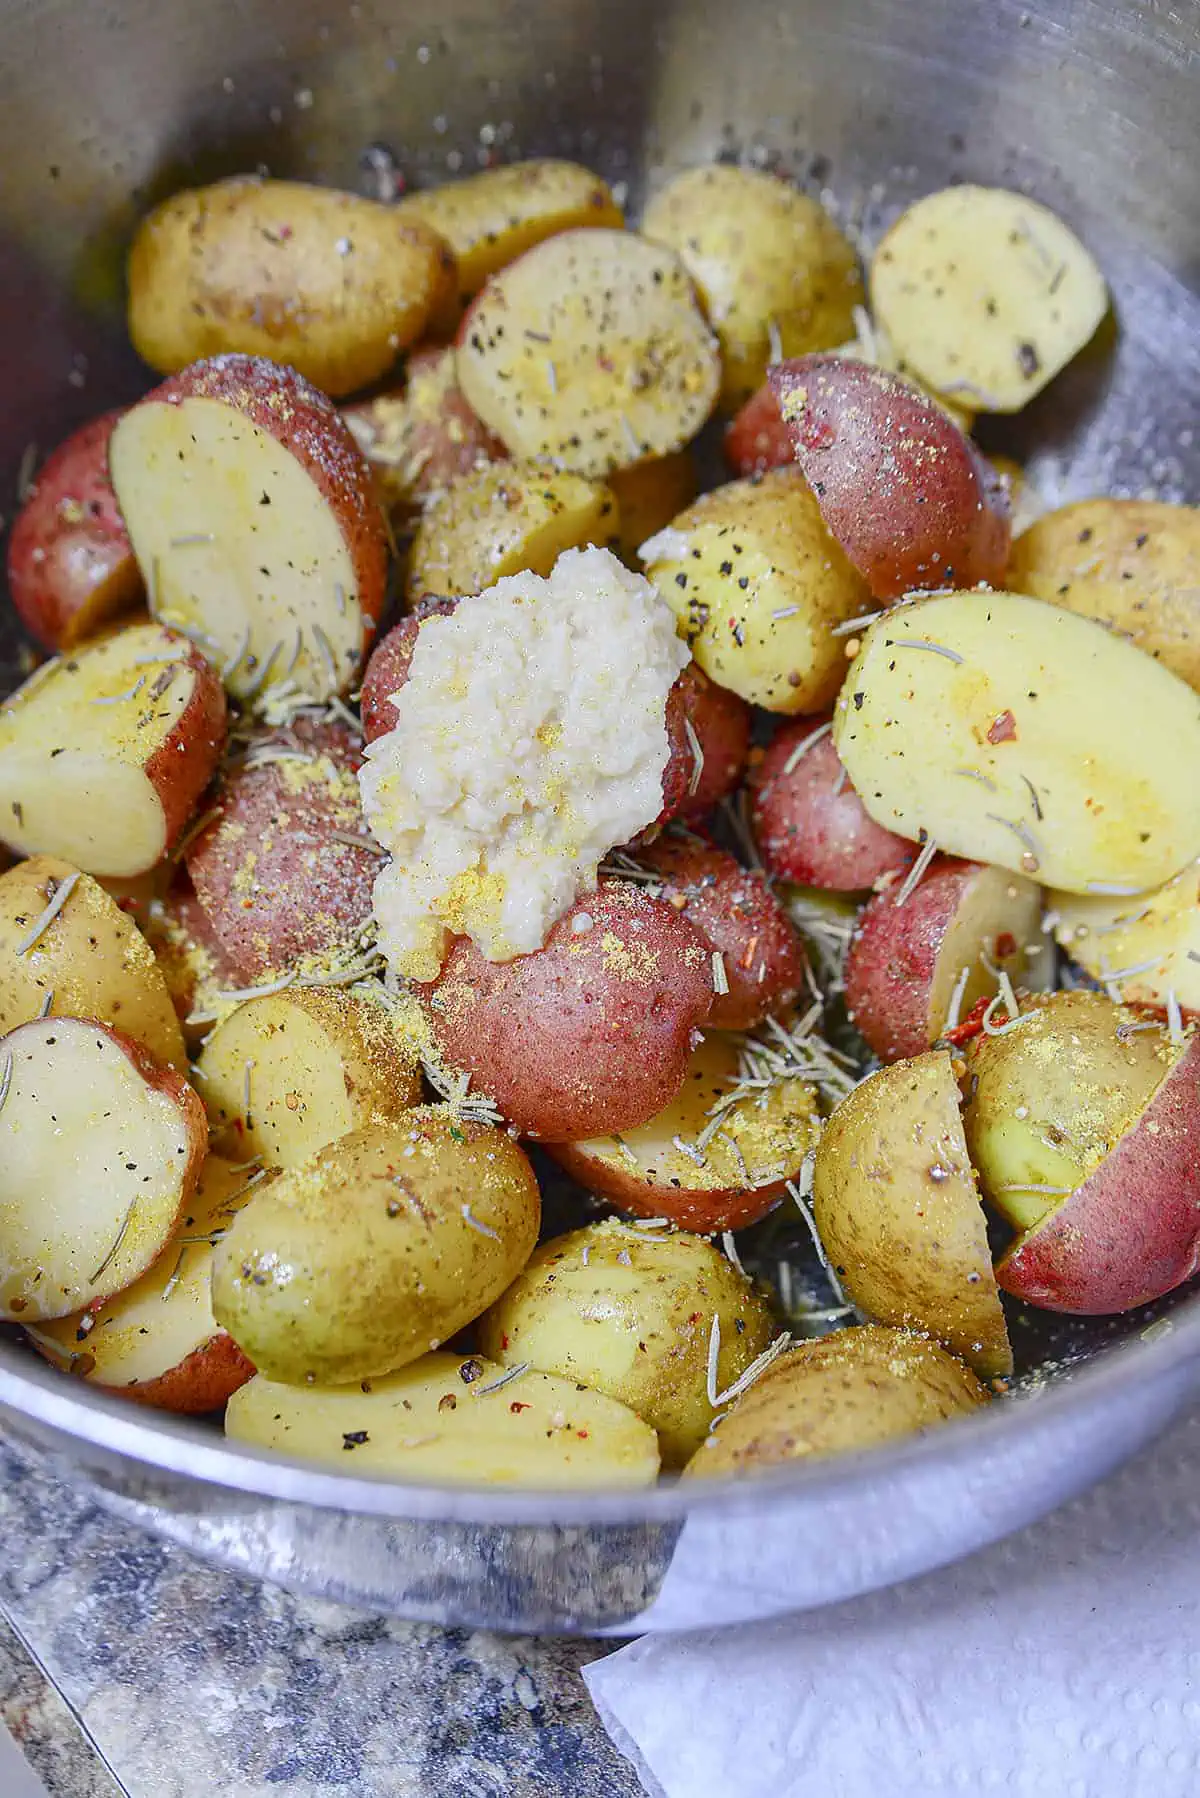 Mixing together the potatoes, pepper, rosemary and garlic in a silver bowl.